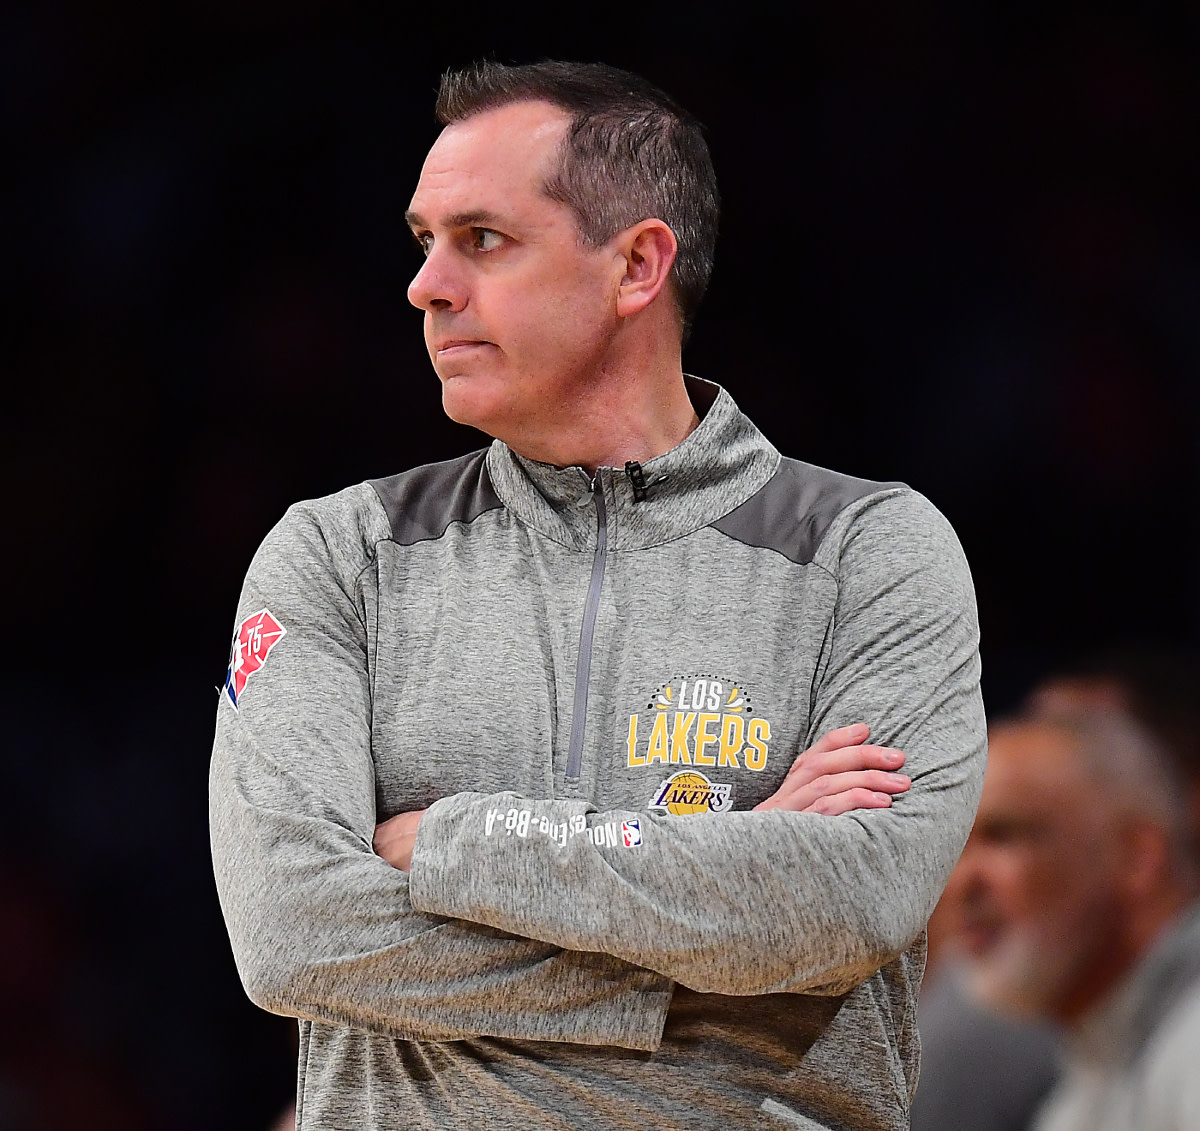 Stephen A. Smith Says The Lakers Should Fire Frank Vogel: "He Has To Go As Head Coach Of This Franchise. We're Seeing A Level Of Inefficiency, A Level Of Ineptitude, A Lack Of Spirit."